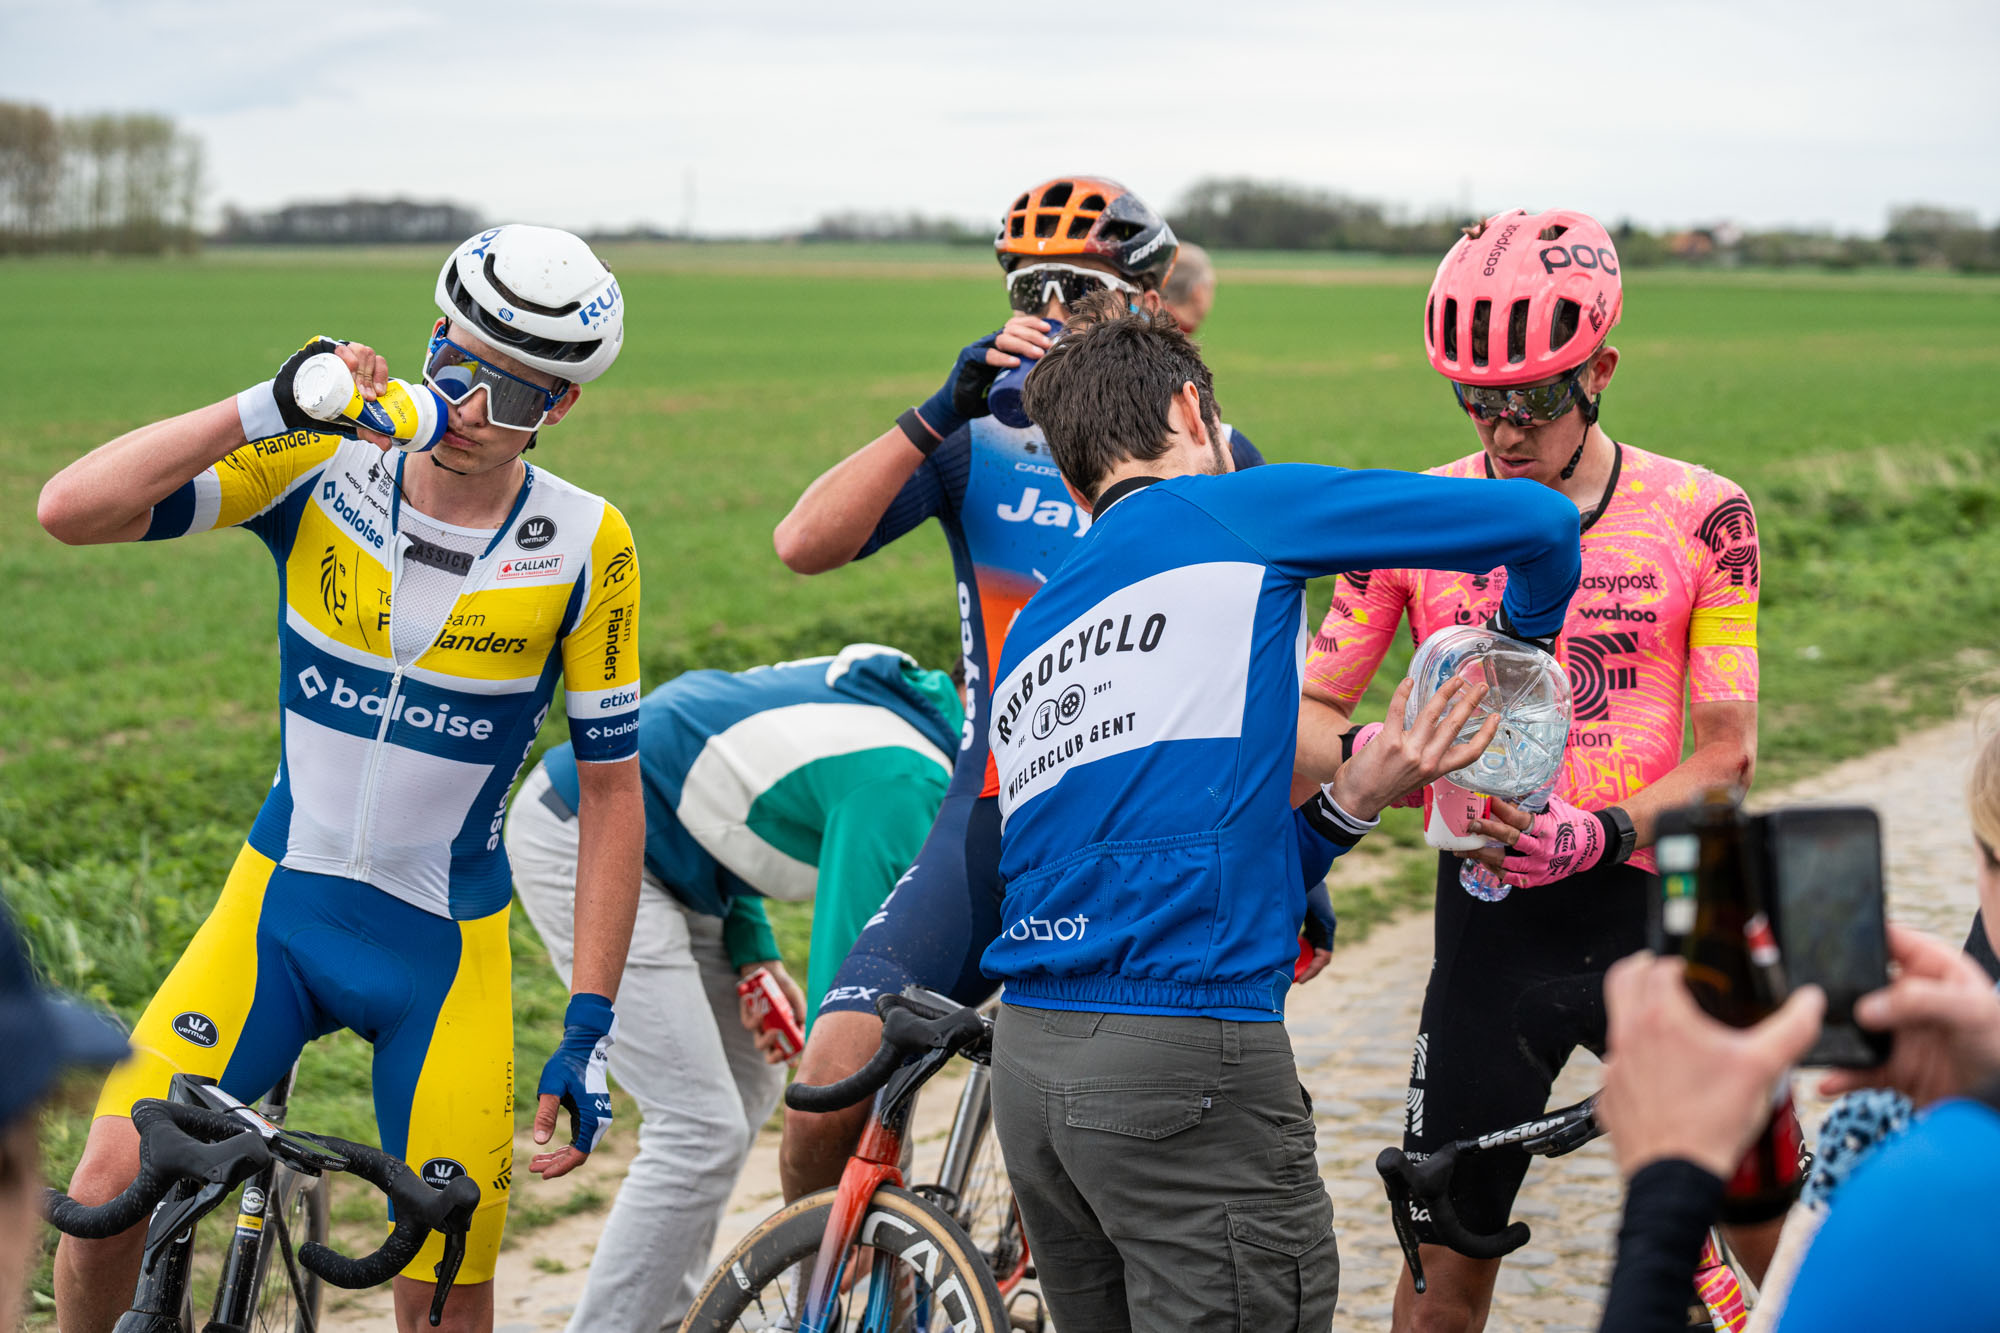 The EF rider and his companions eagerly accept water from roadside fans.